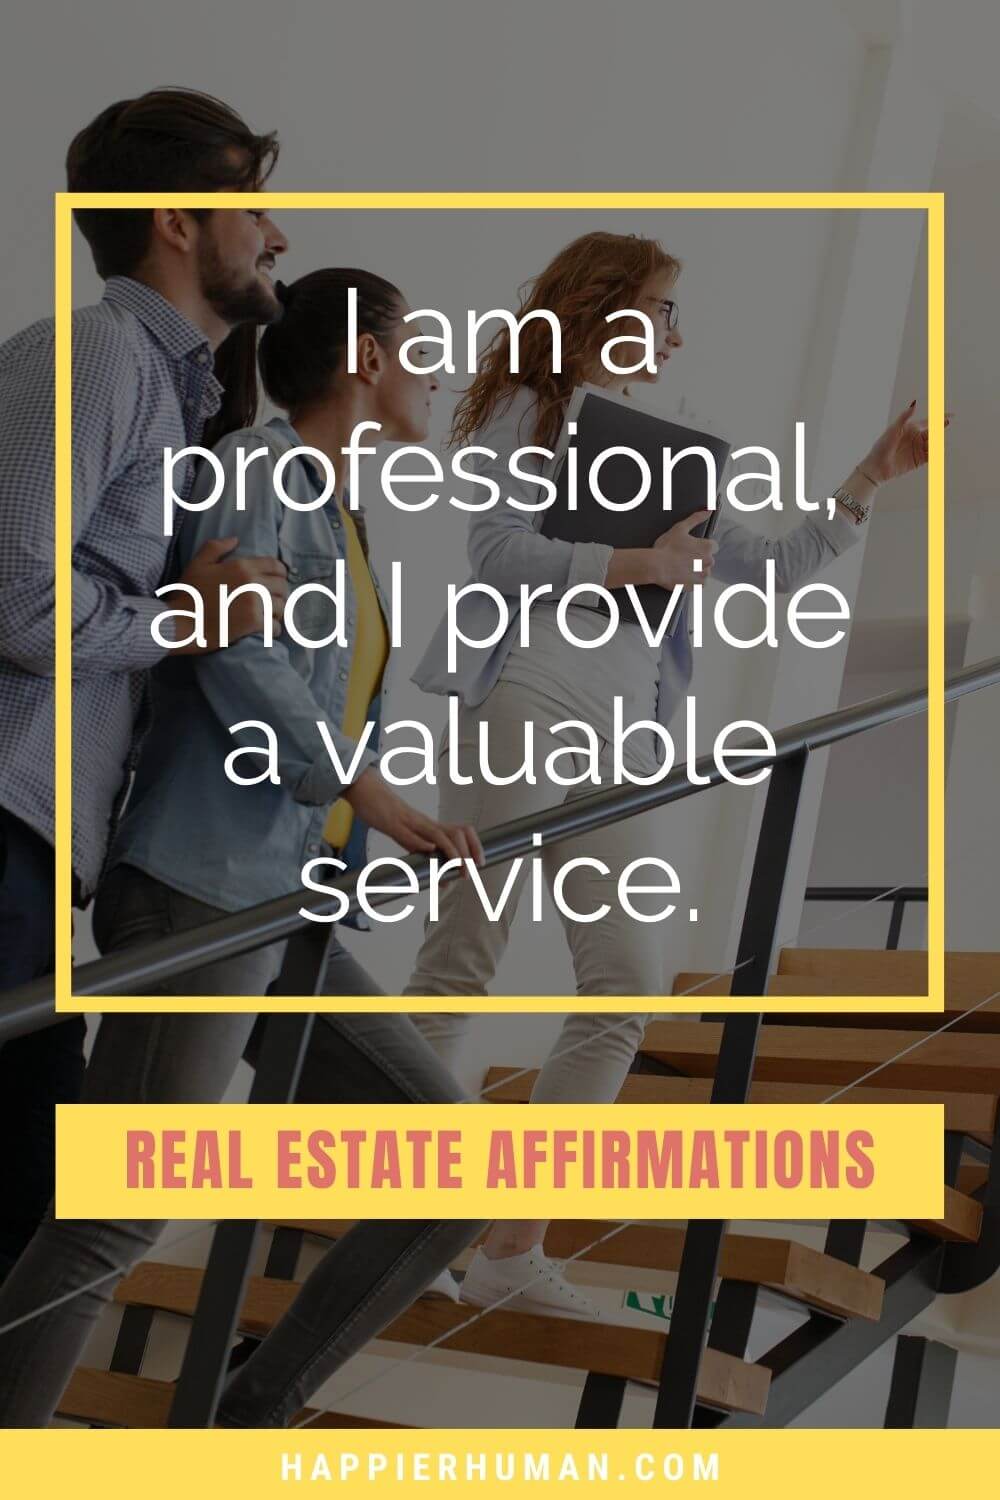 Real Estate Affirmations - I am a professional, and I provide a valuable service. | real estate mantra | positive affirmations | acknowledgement in real estate